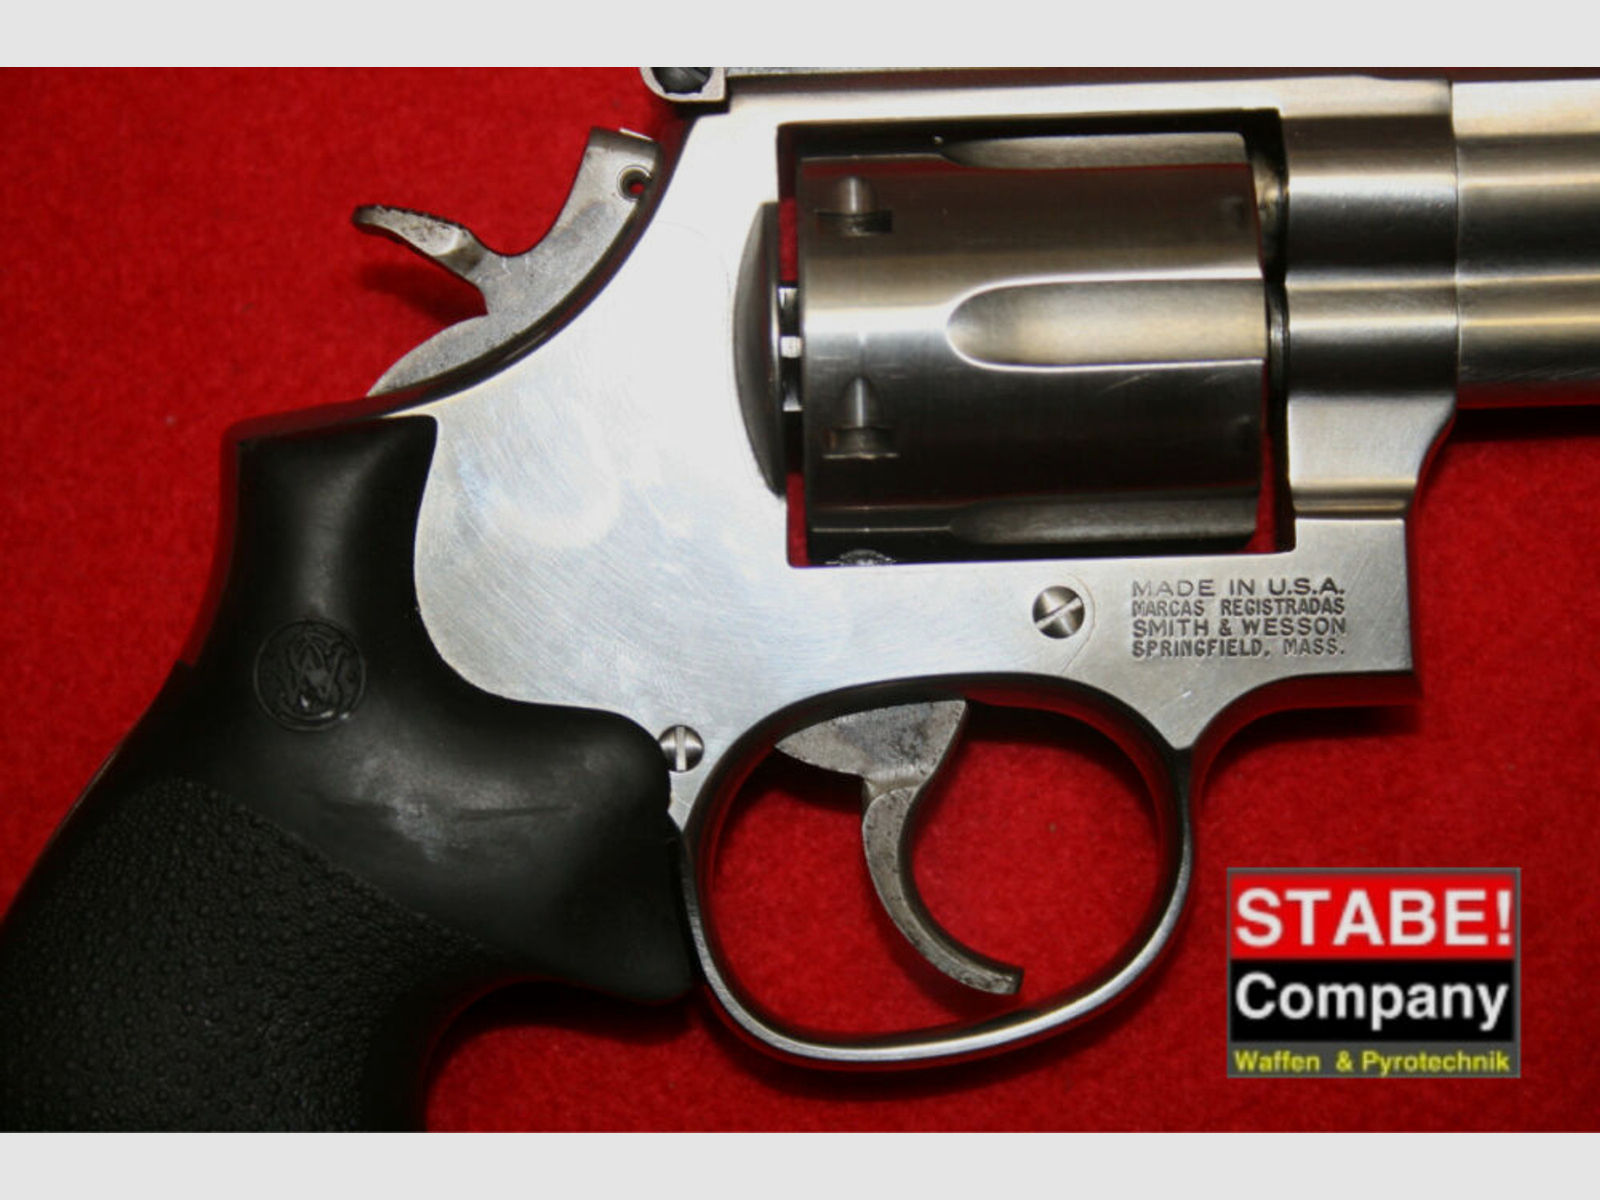 Smith & Wesson	 686-4